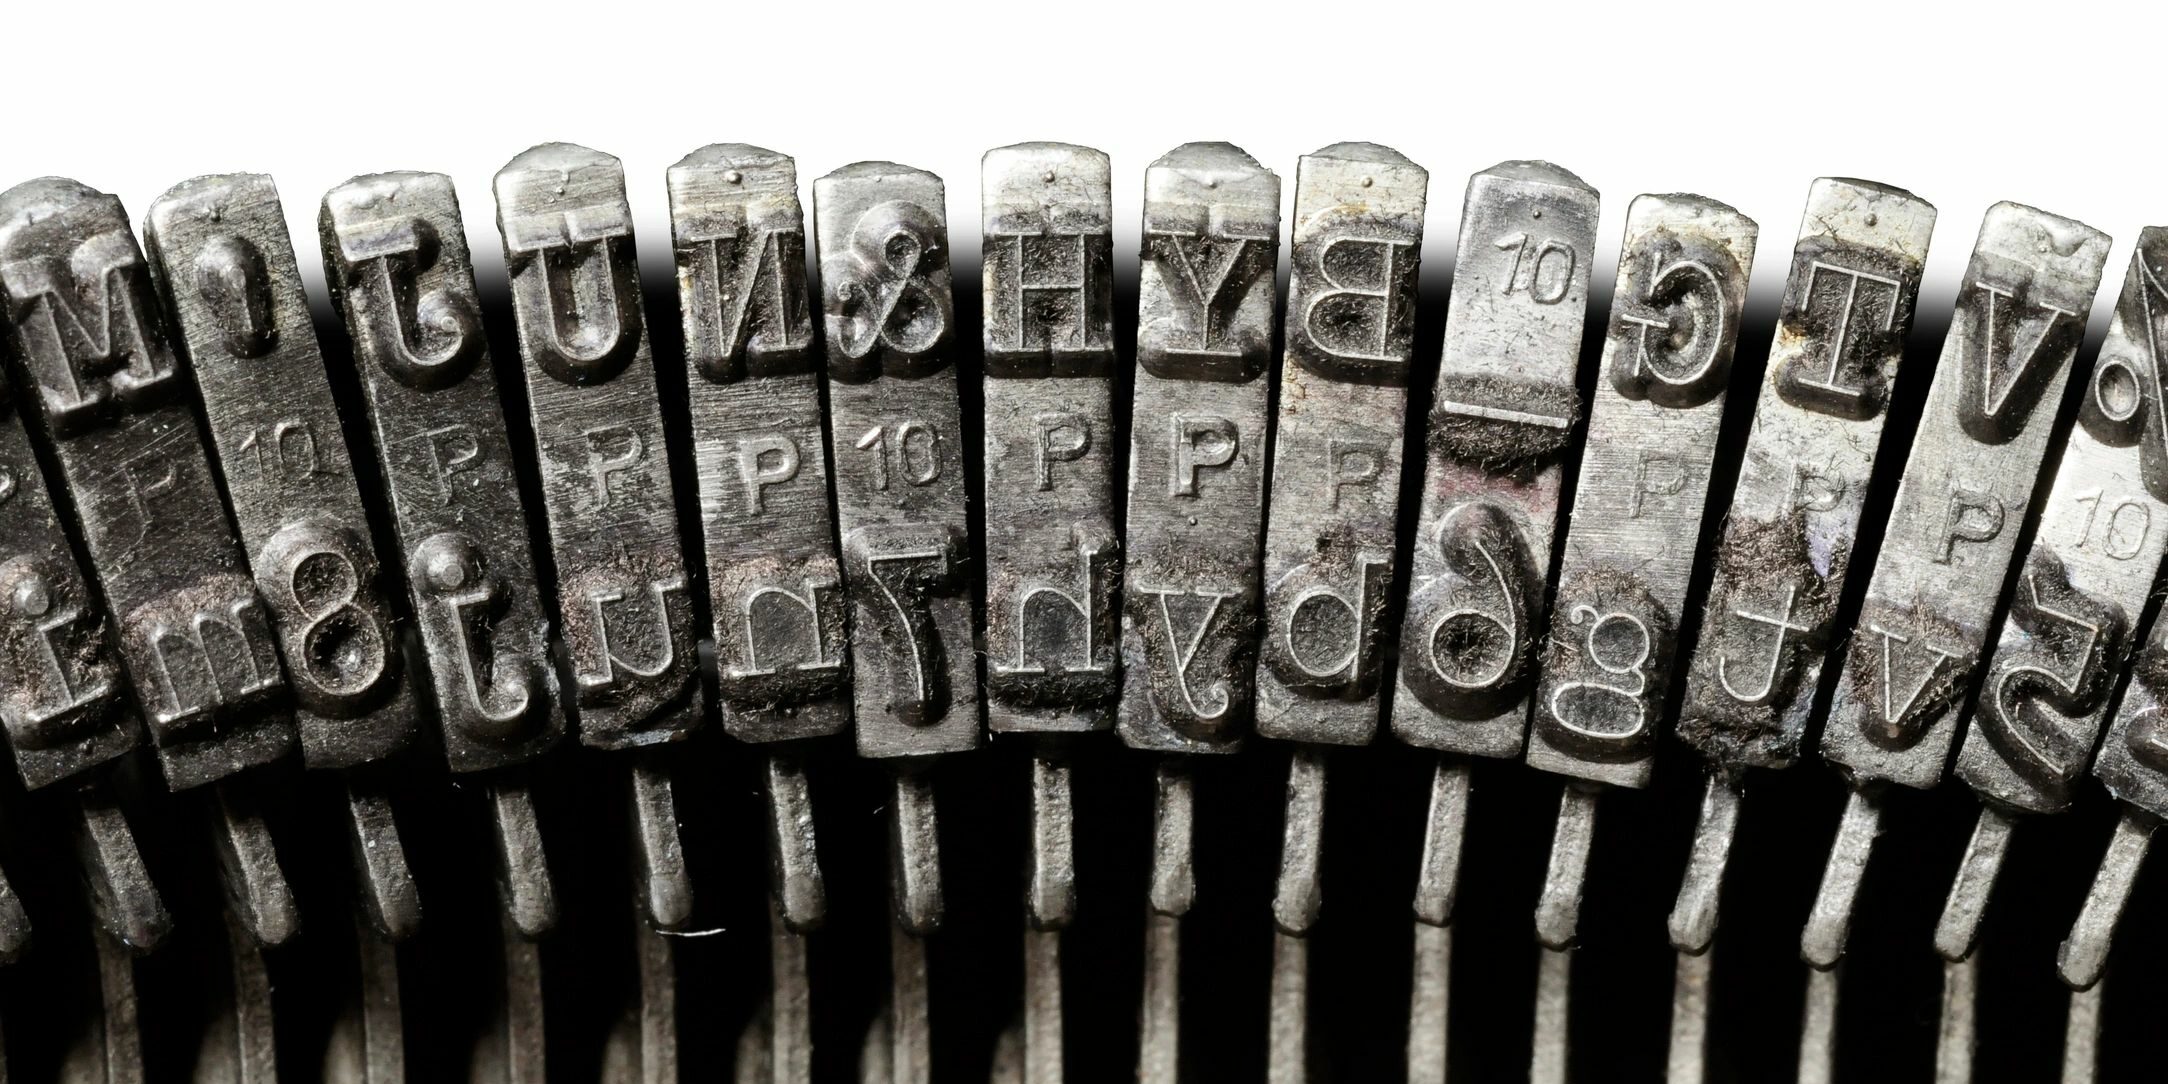 image of keys on an old-fashioned keyboard